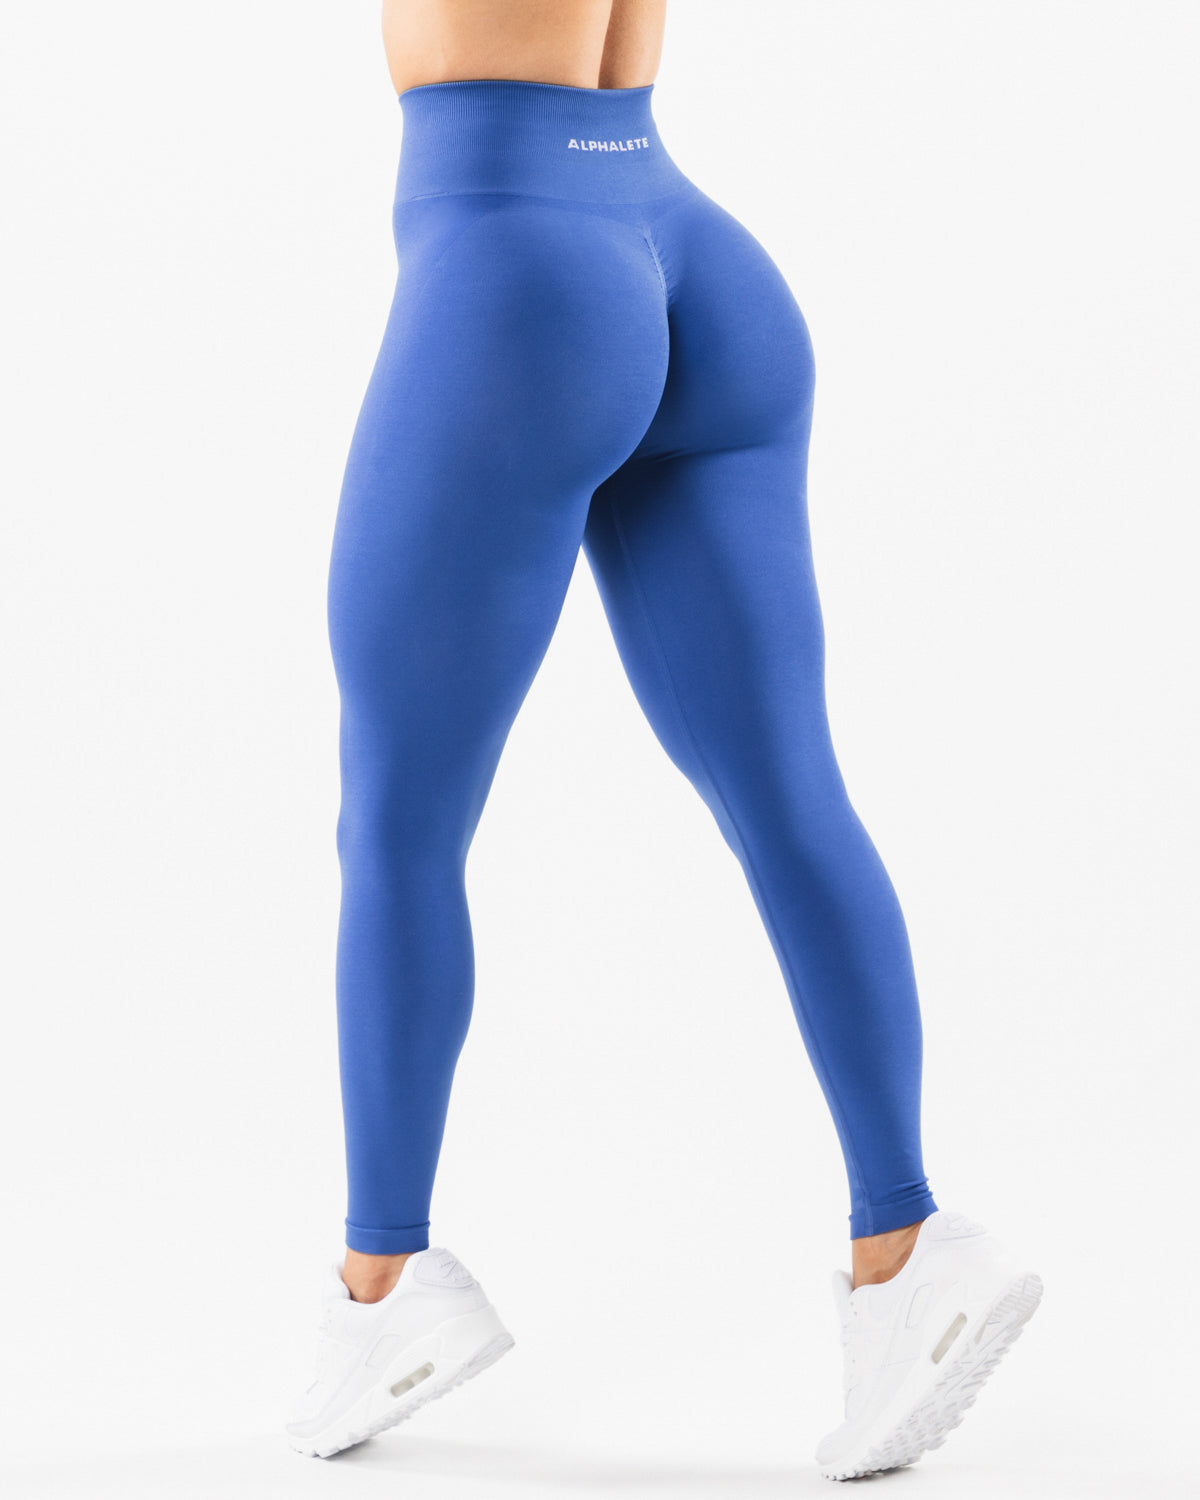 Alphalete Amplify Legging Blue Size M - $70 - From norma